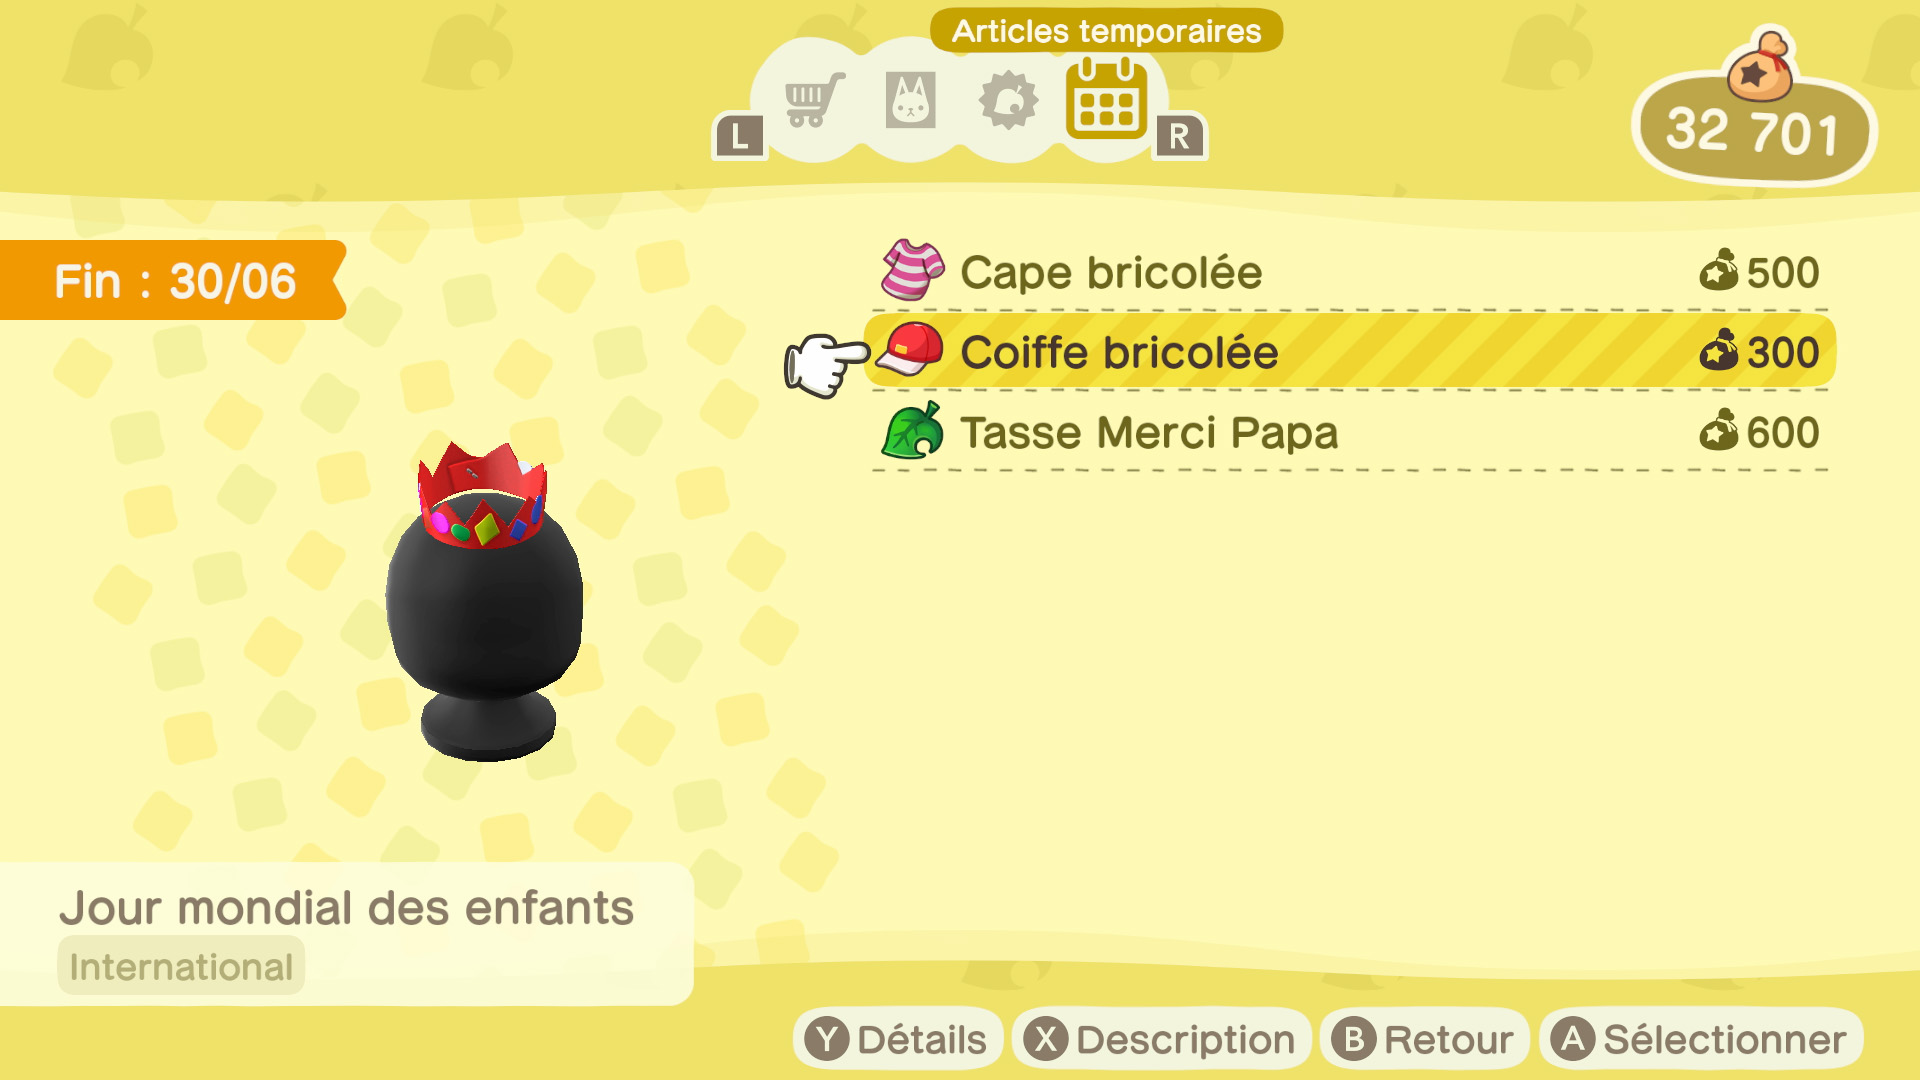 Coiffe bricolée - articles temporaires du nook shopping - animal crossing new horizons